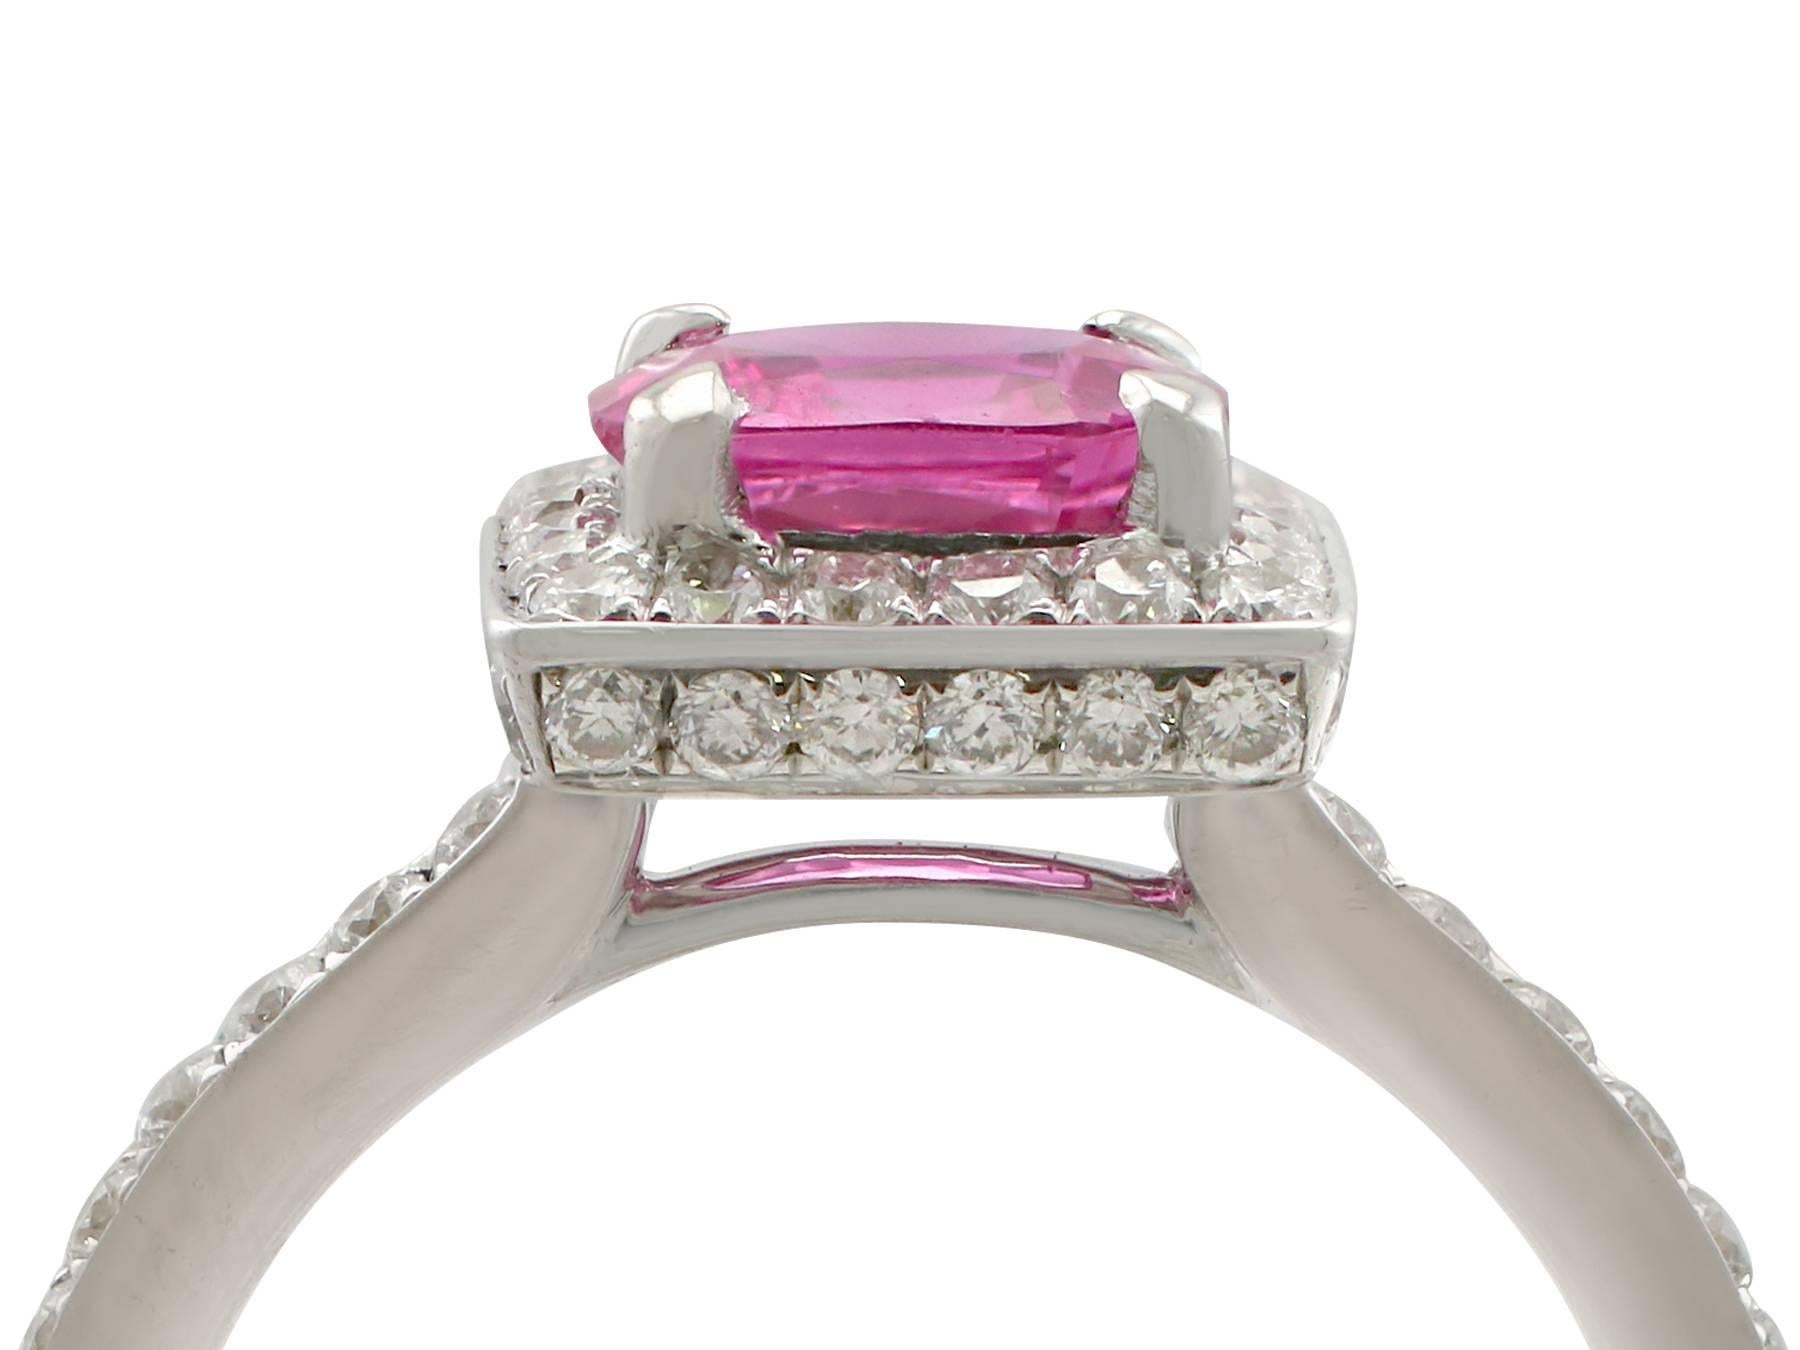 A stunning 1.27 carat pink sapphire, 0.60 carat diamond and 18 karat white gold halo style cocktail ring; part of our diverse antique jewelry and estate jewelry collections

This stunning, fine and impressive pink sapphire ring has been crafted in